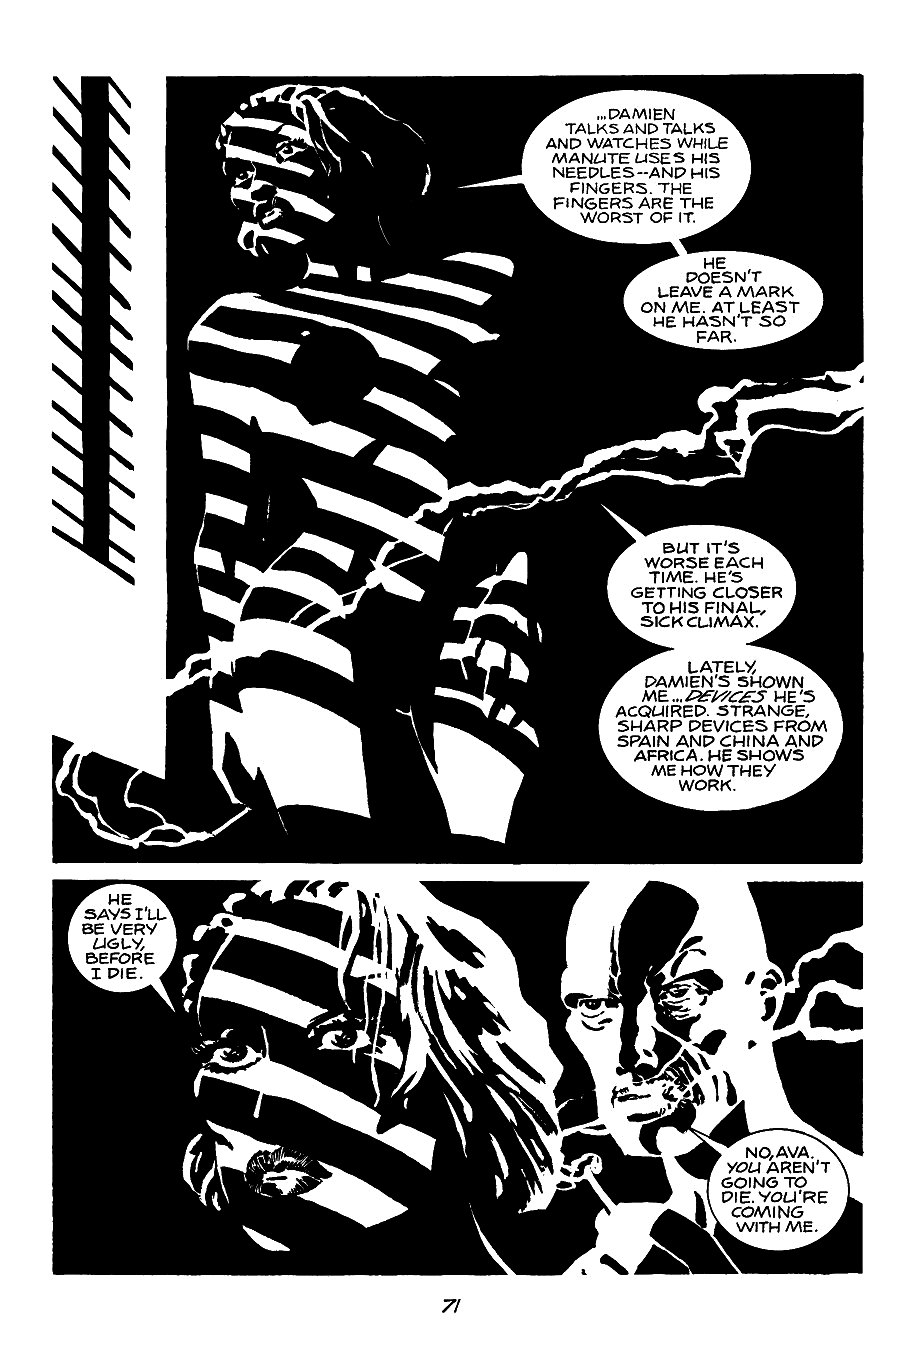 page 71 of sin city 2 the hard goodbye